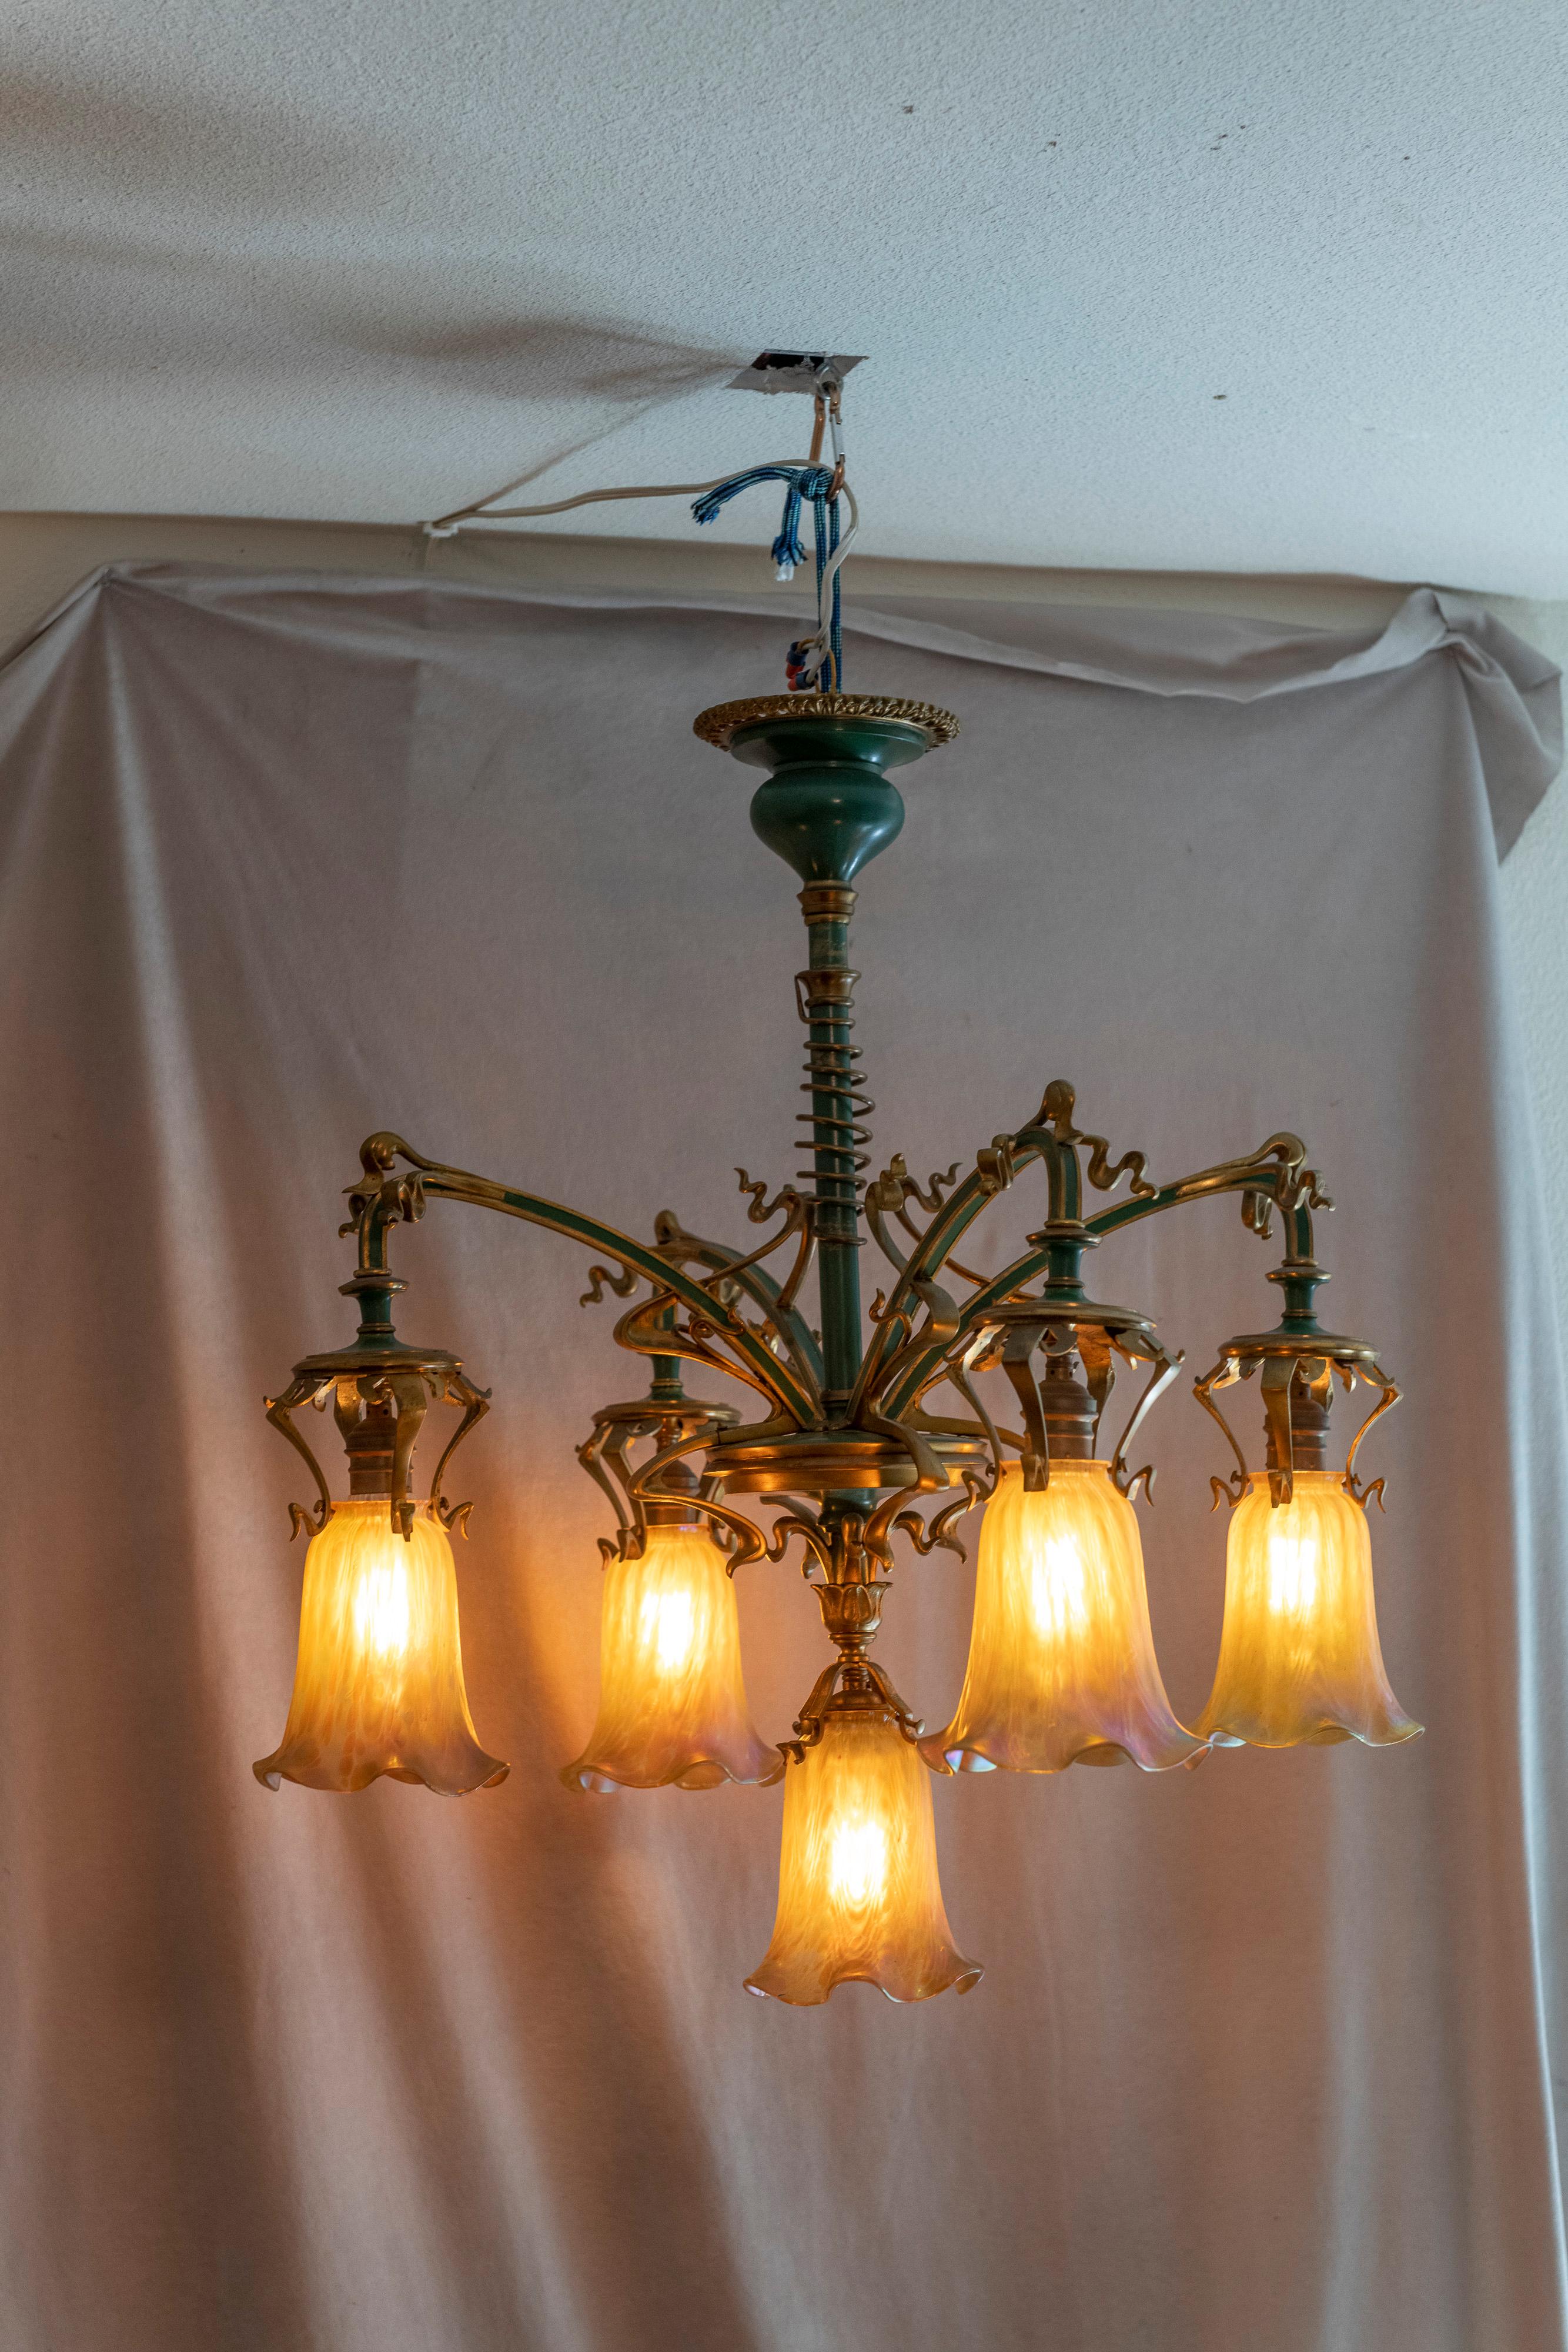 One of the finest Austrian chandeliers we have ever owned. We are saying that it has Art Nouveau influence as well Vienna Secessionist influence. It's got a lot going on for the typical Secessionist chandeliers, and that was our conundrum.It took us